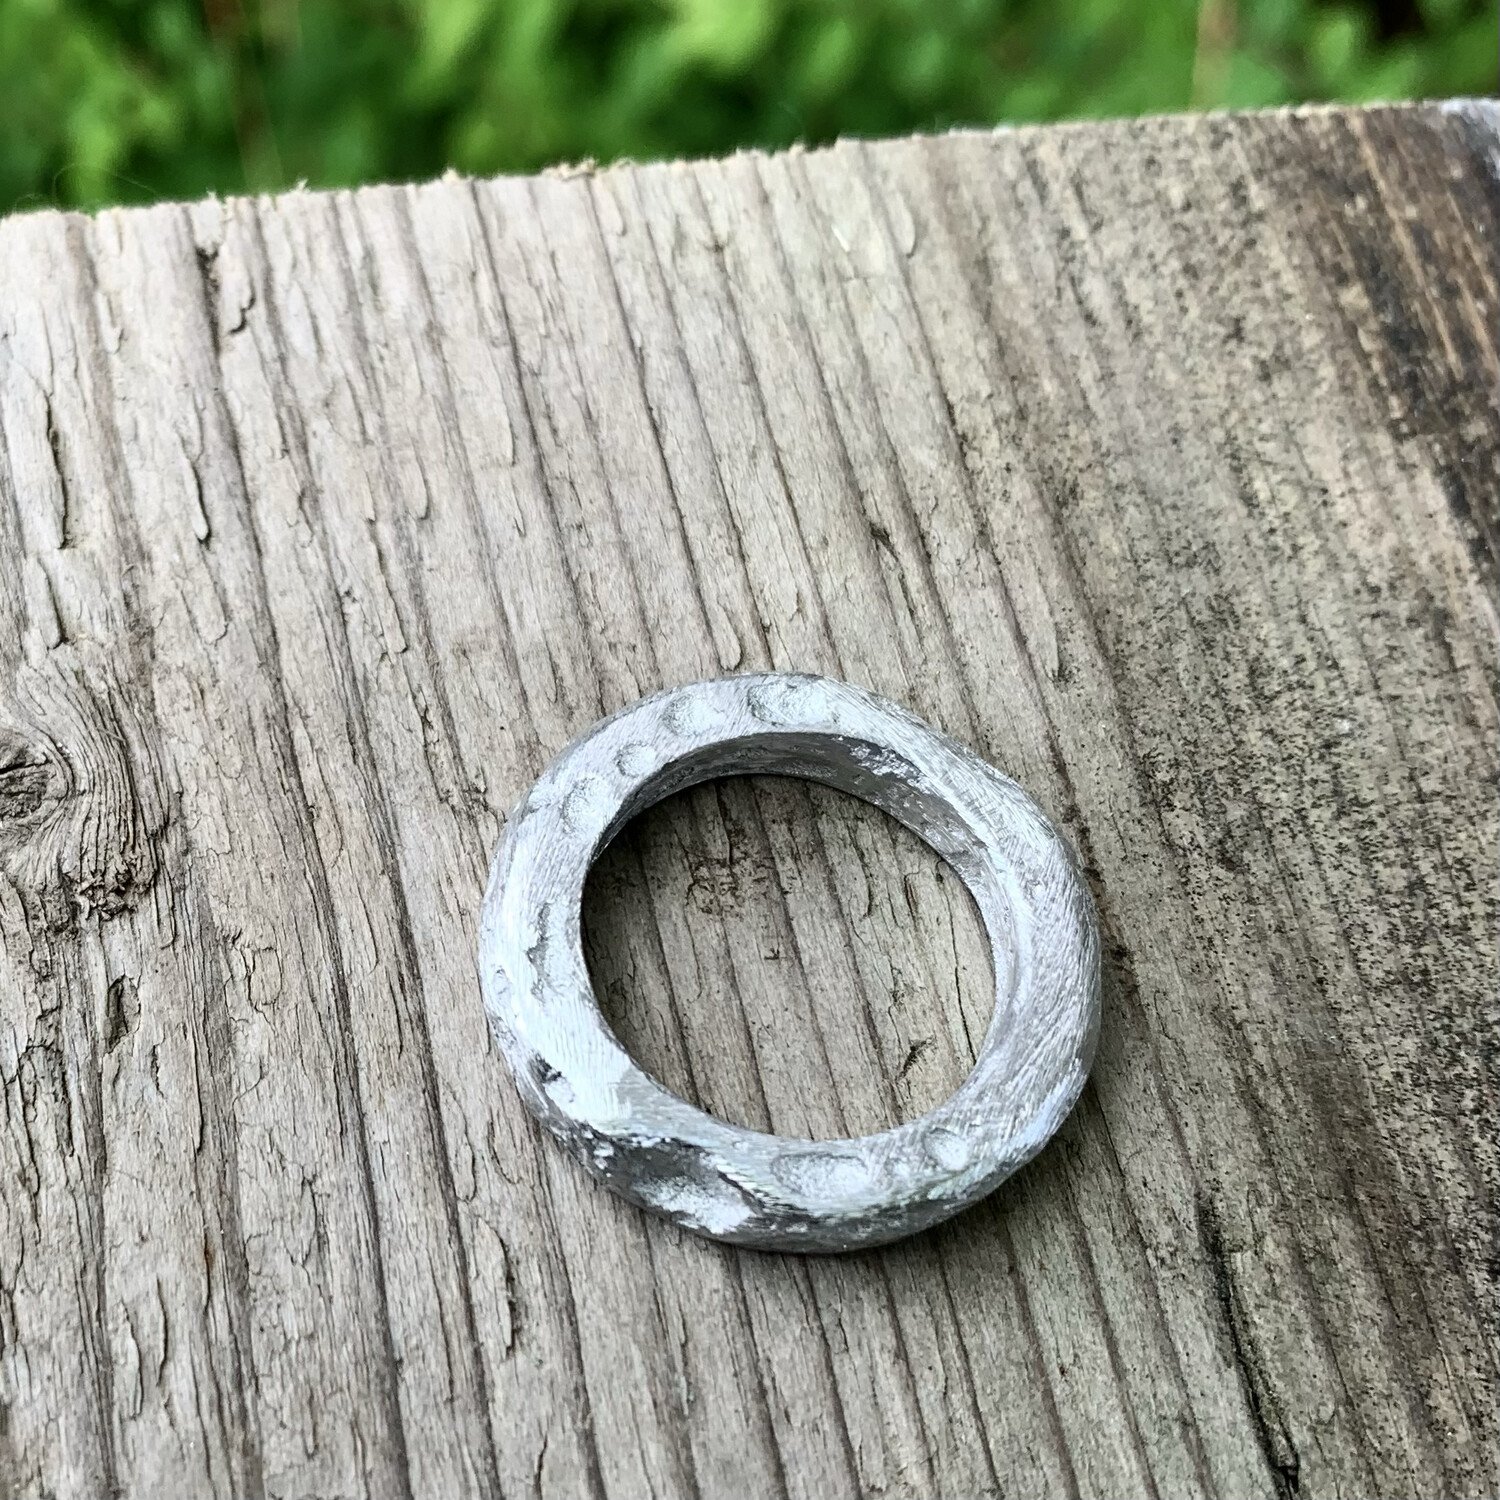 Make a Pewter Cast Ring Workshop - One to One - 1 Day